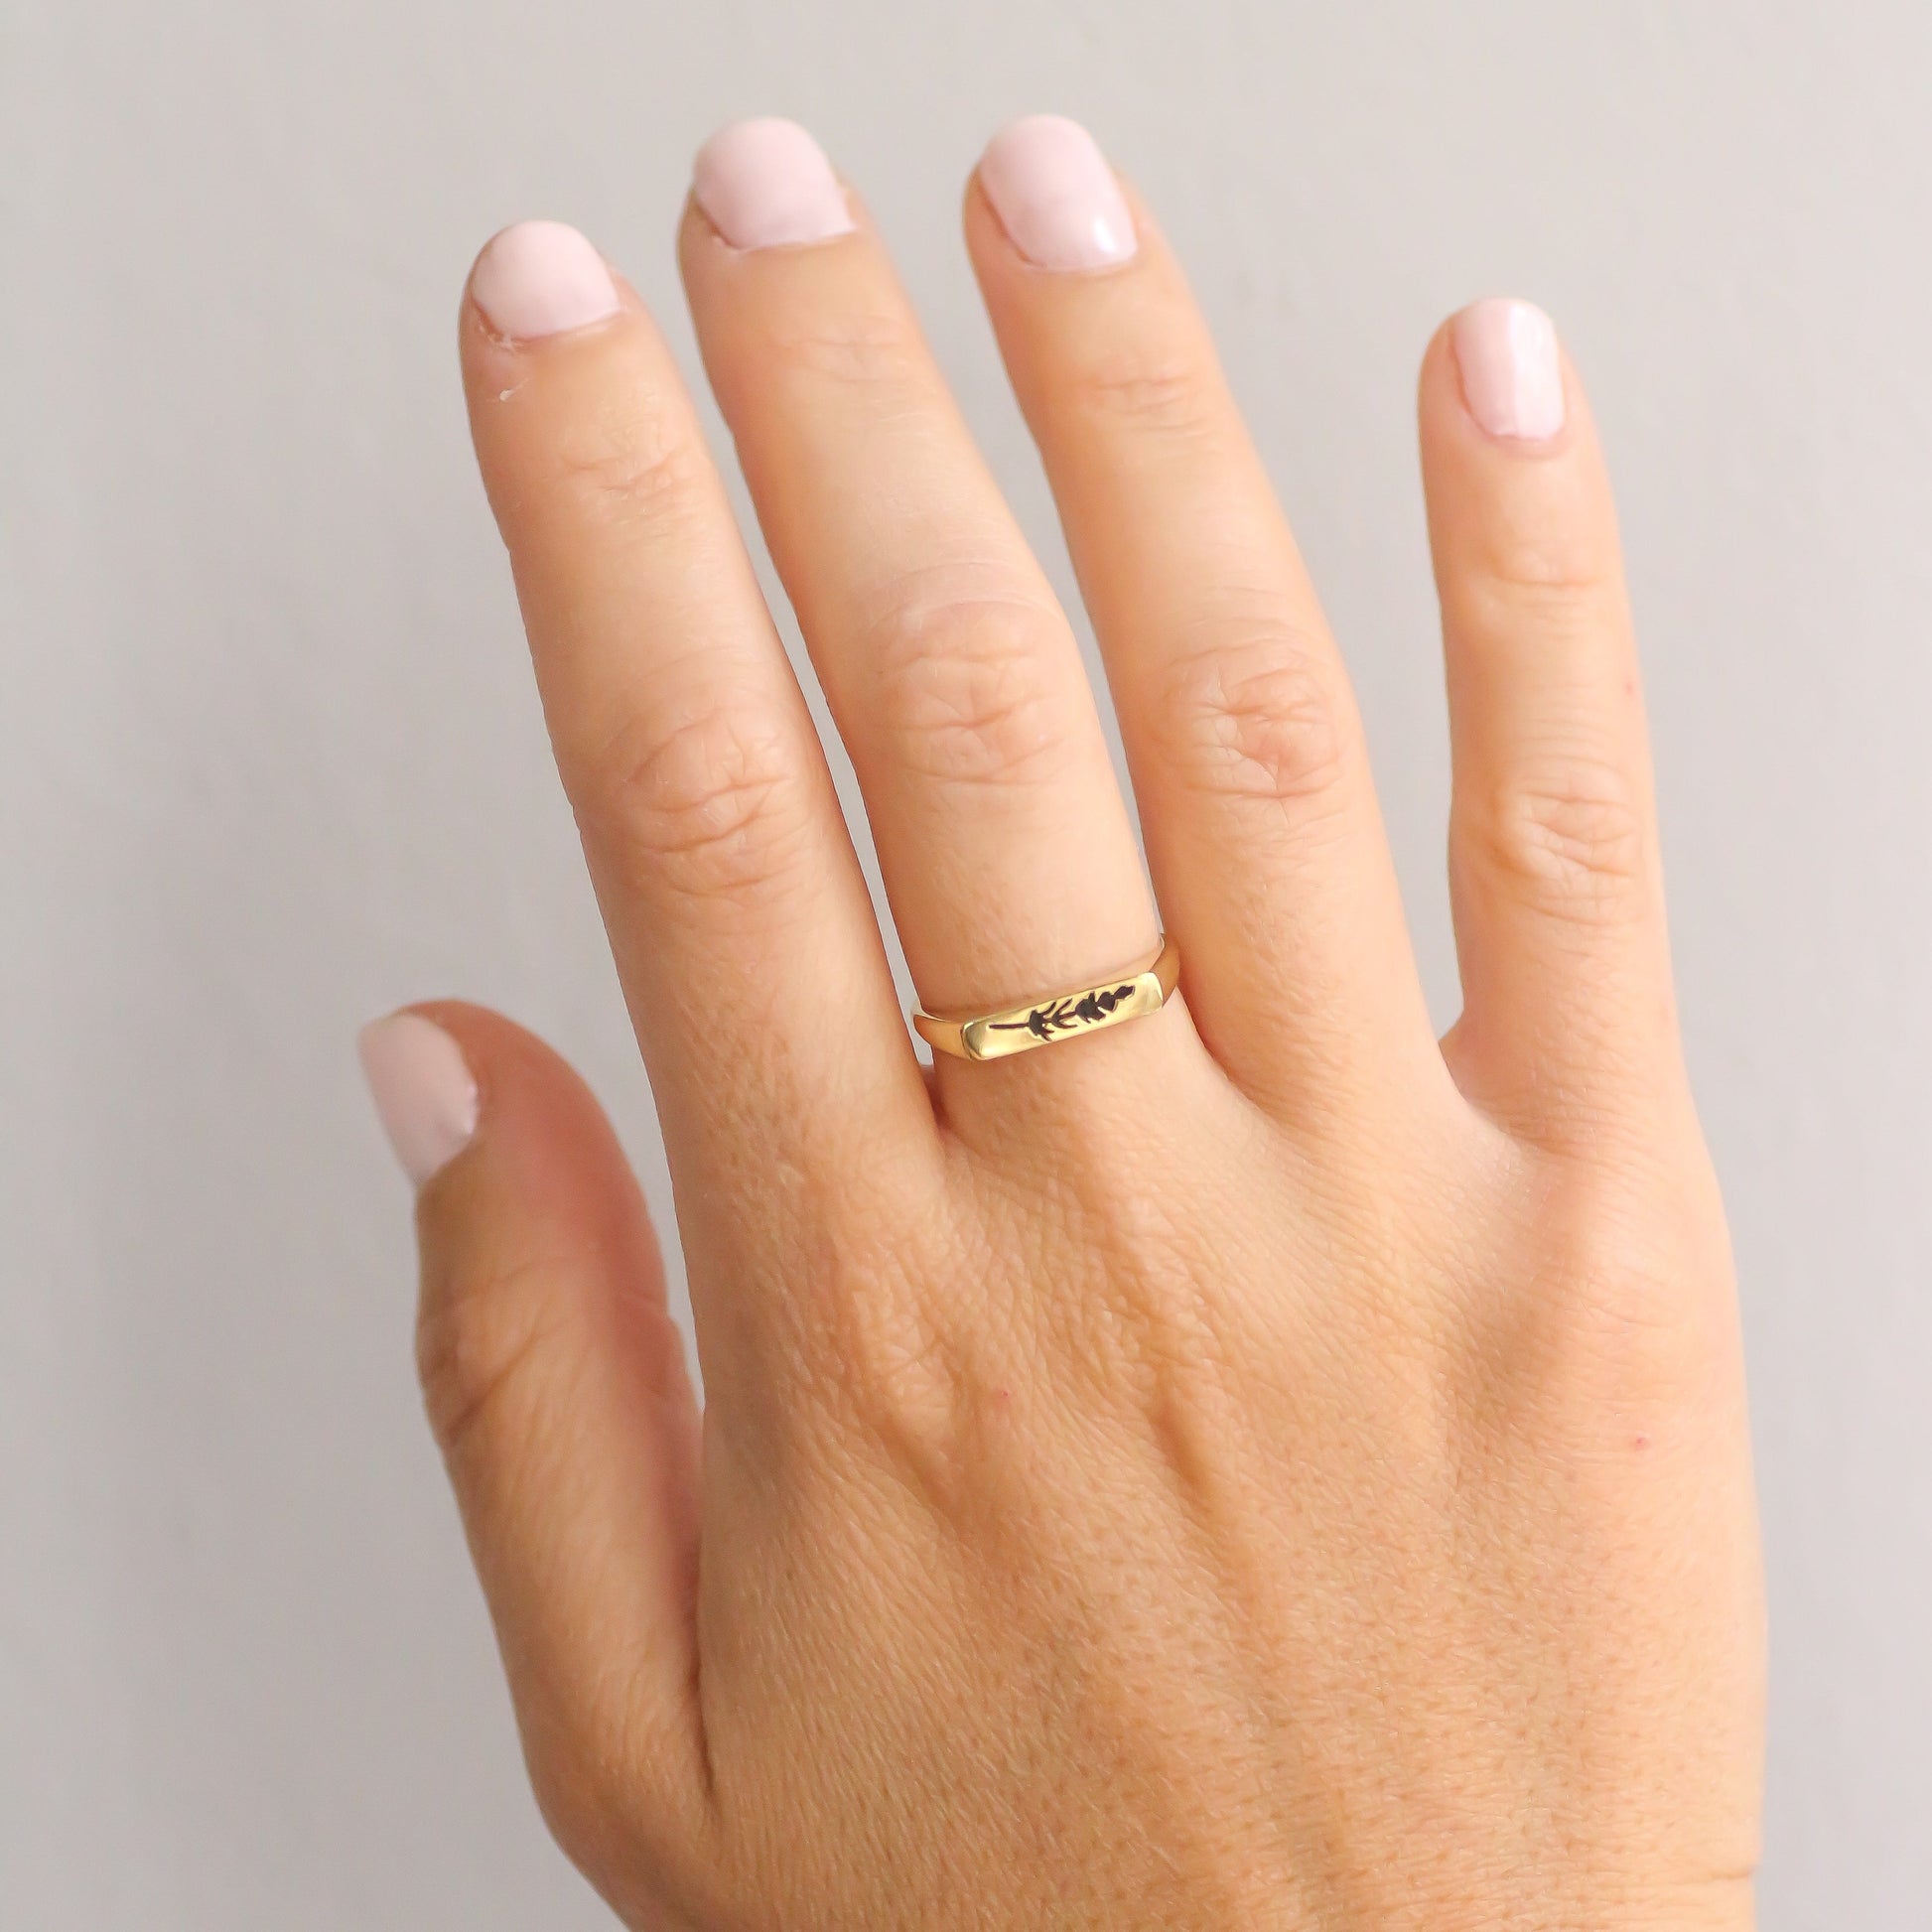 Hand wearing a thin gold signet ring with a lavender engraving